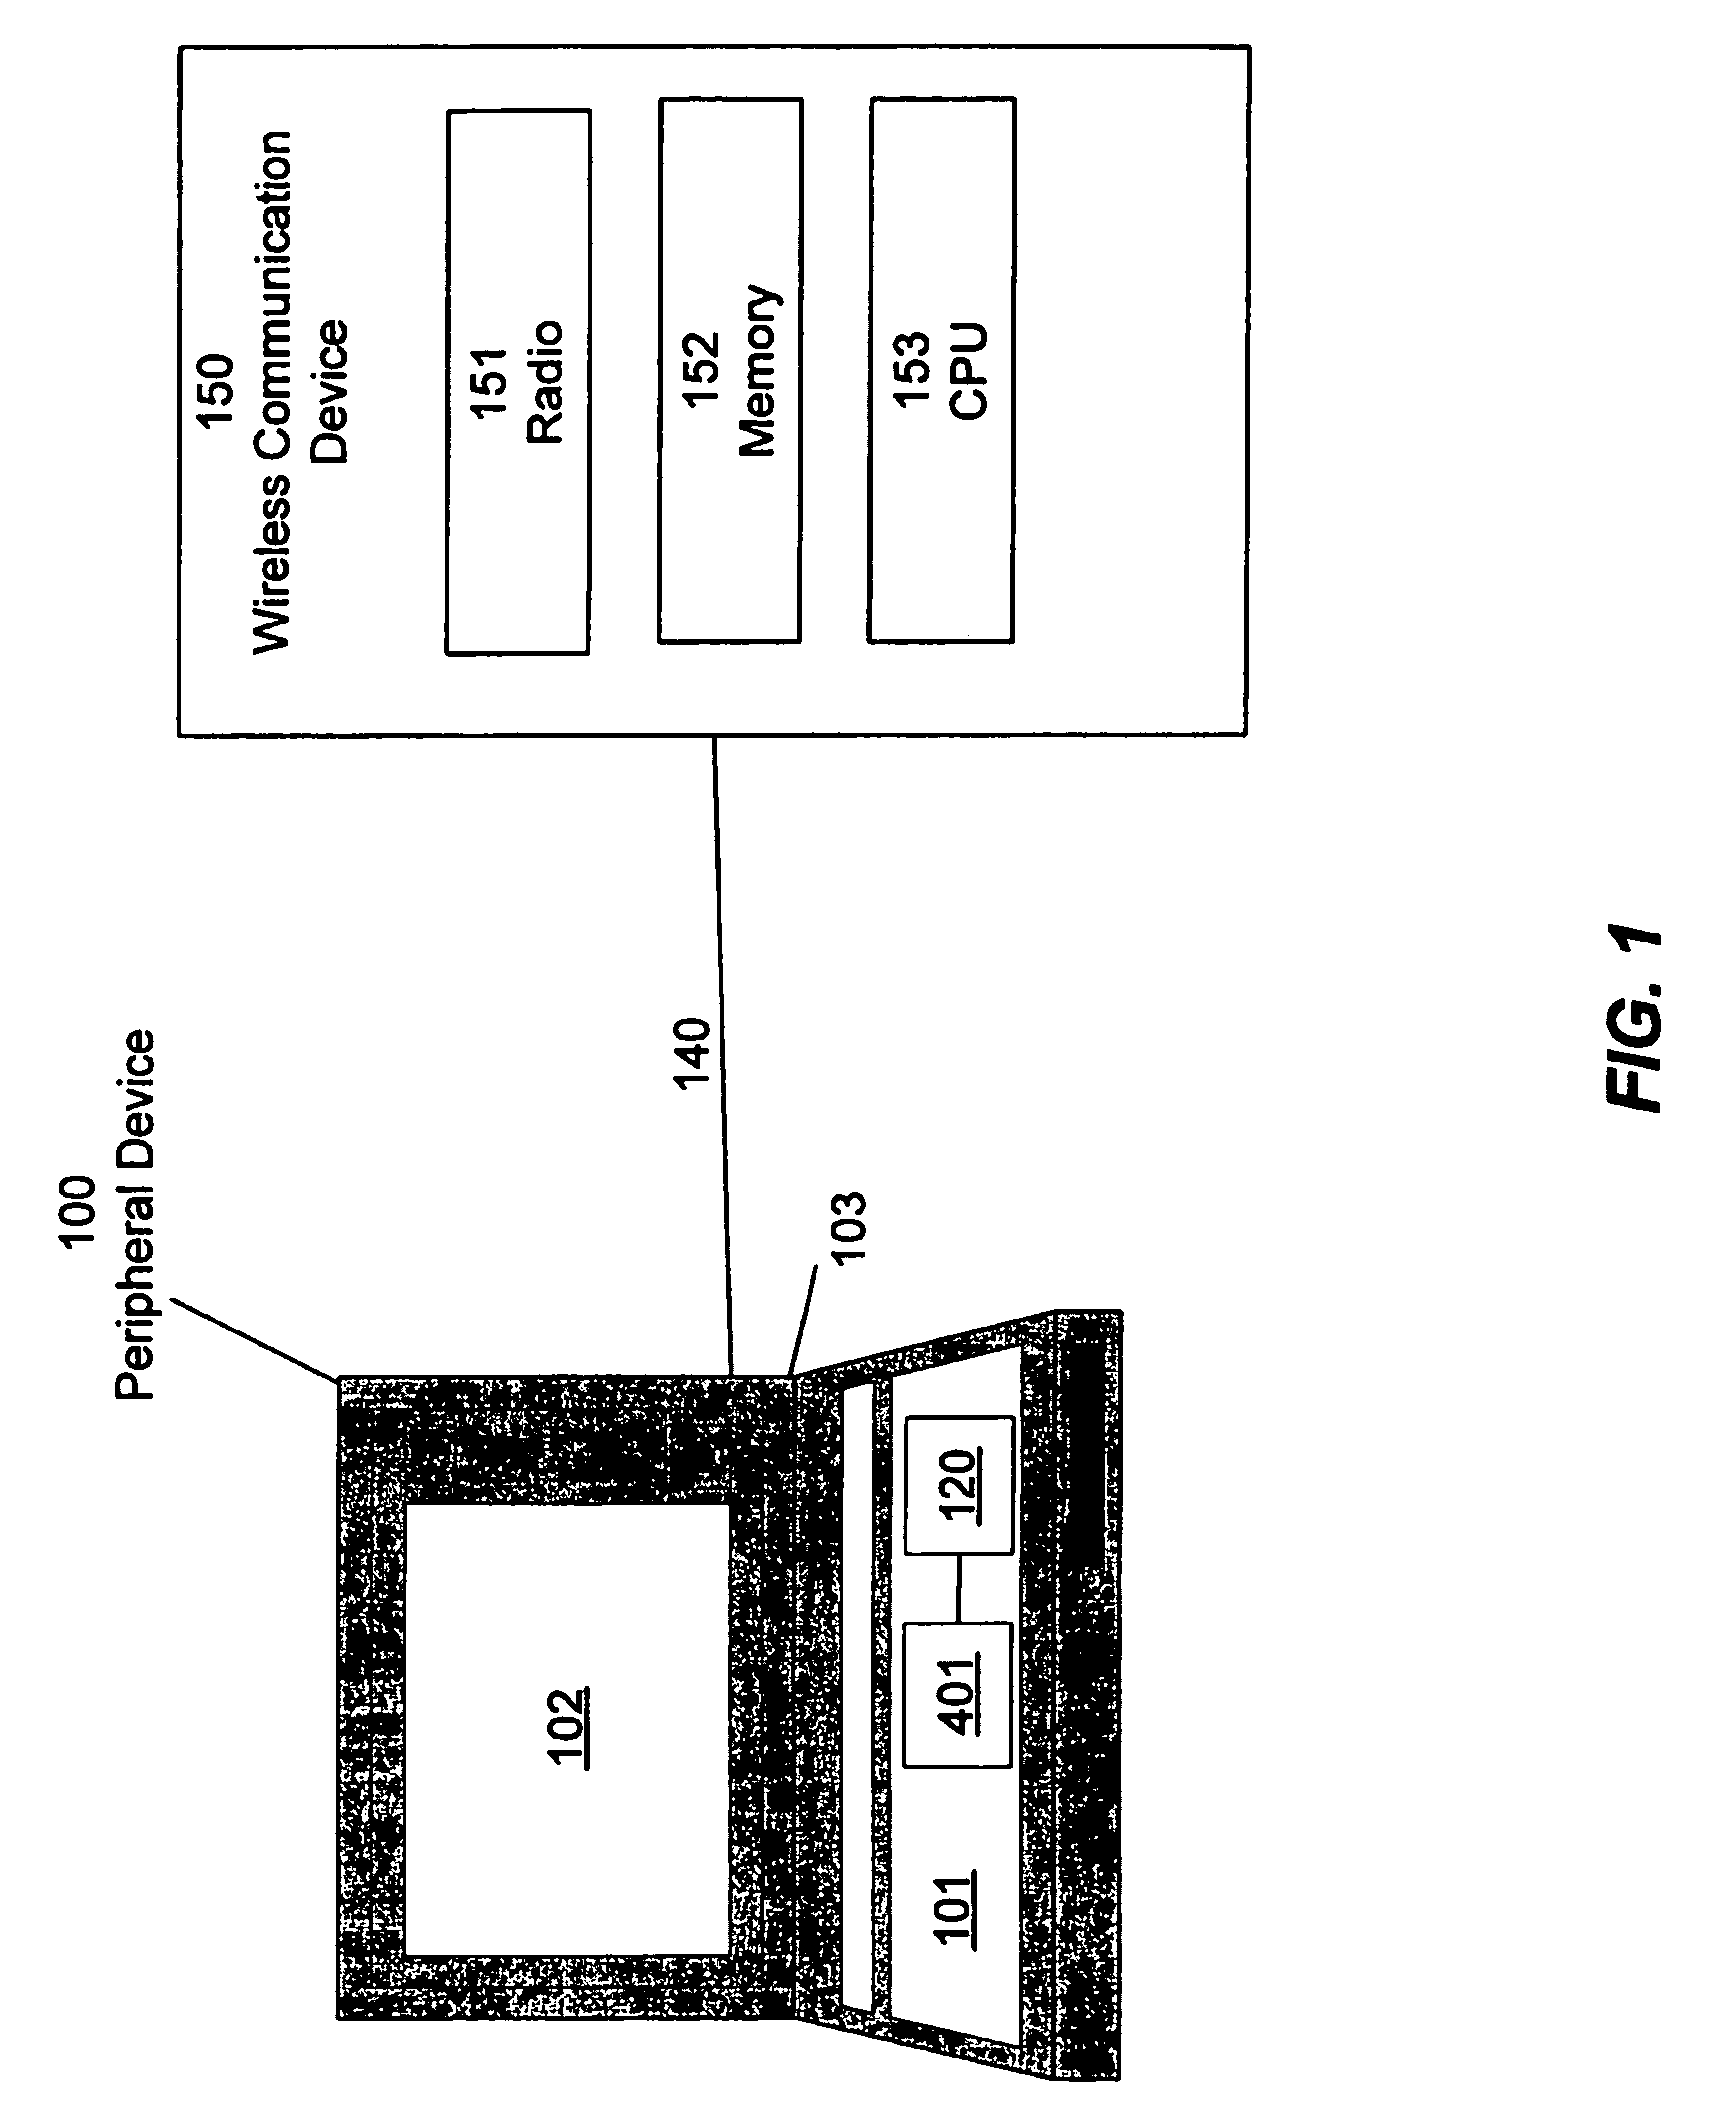 Peripheral device for a wireless communication device